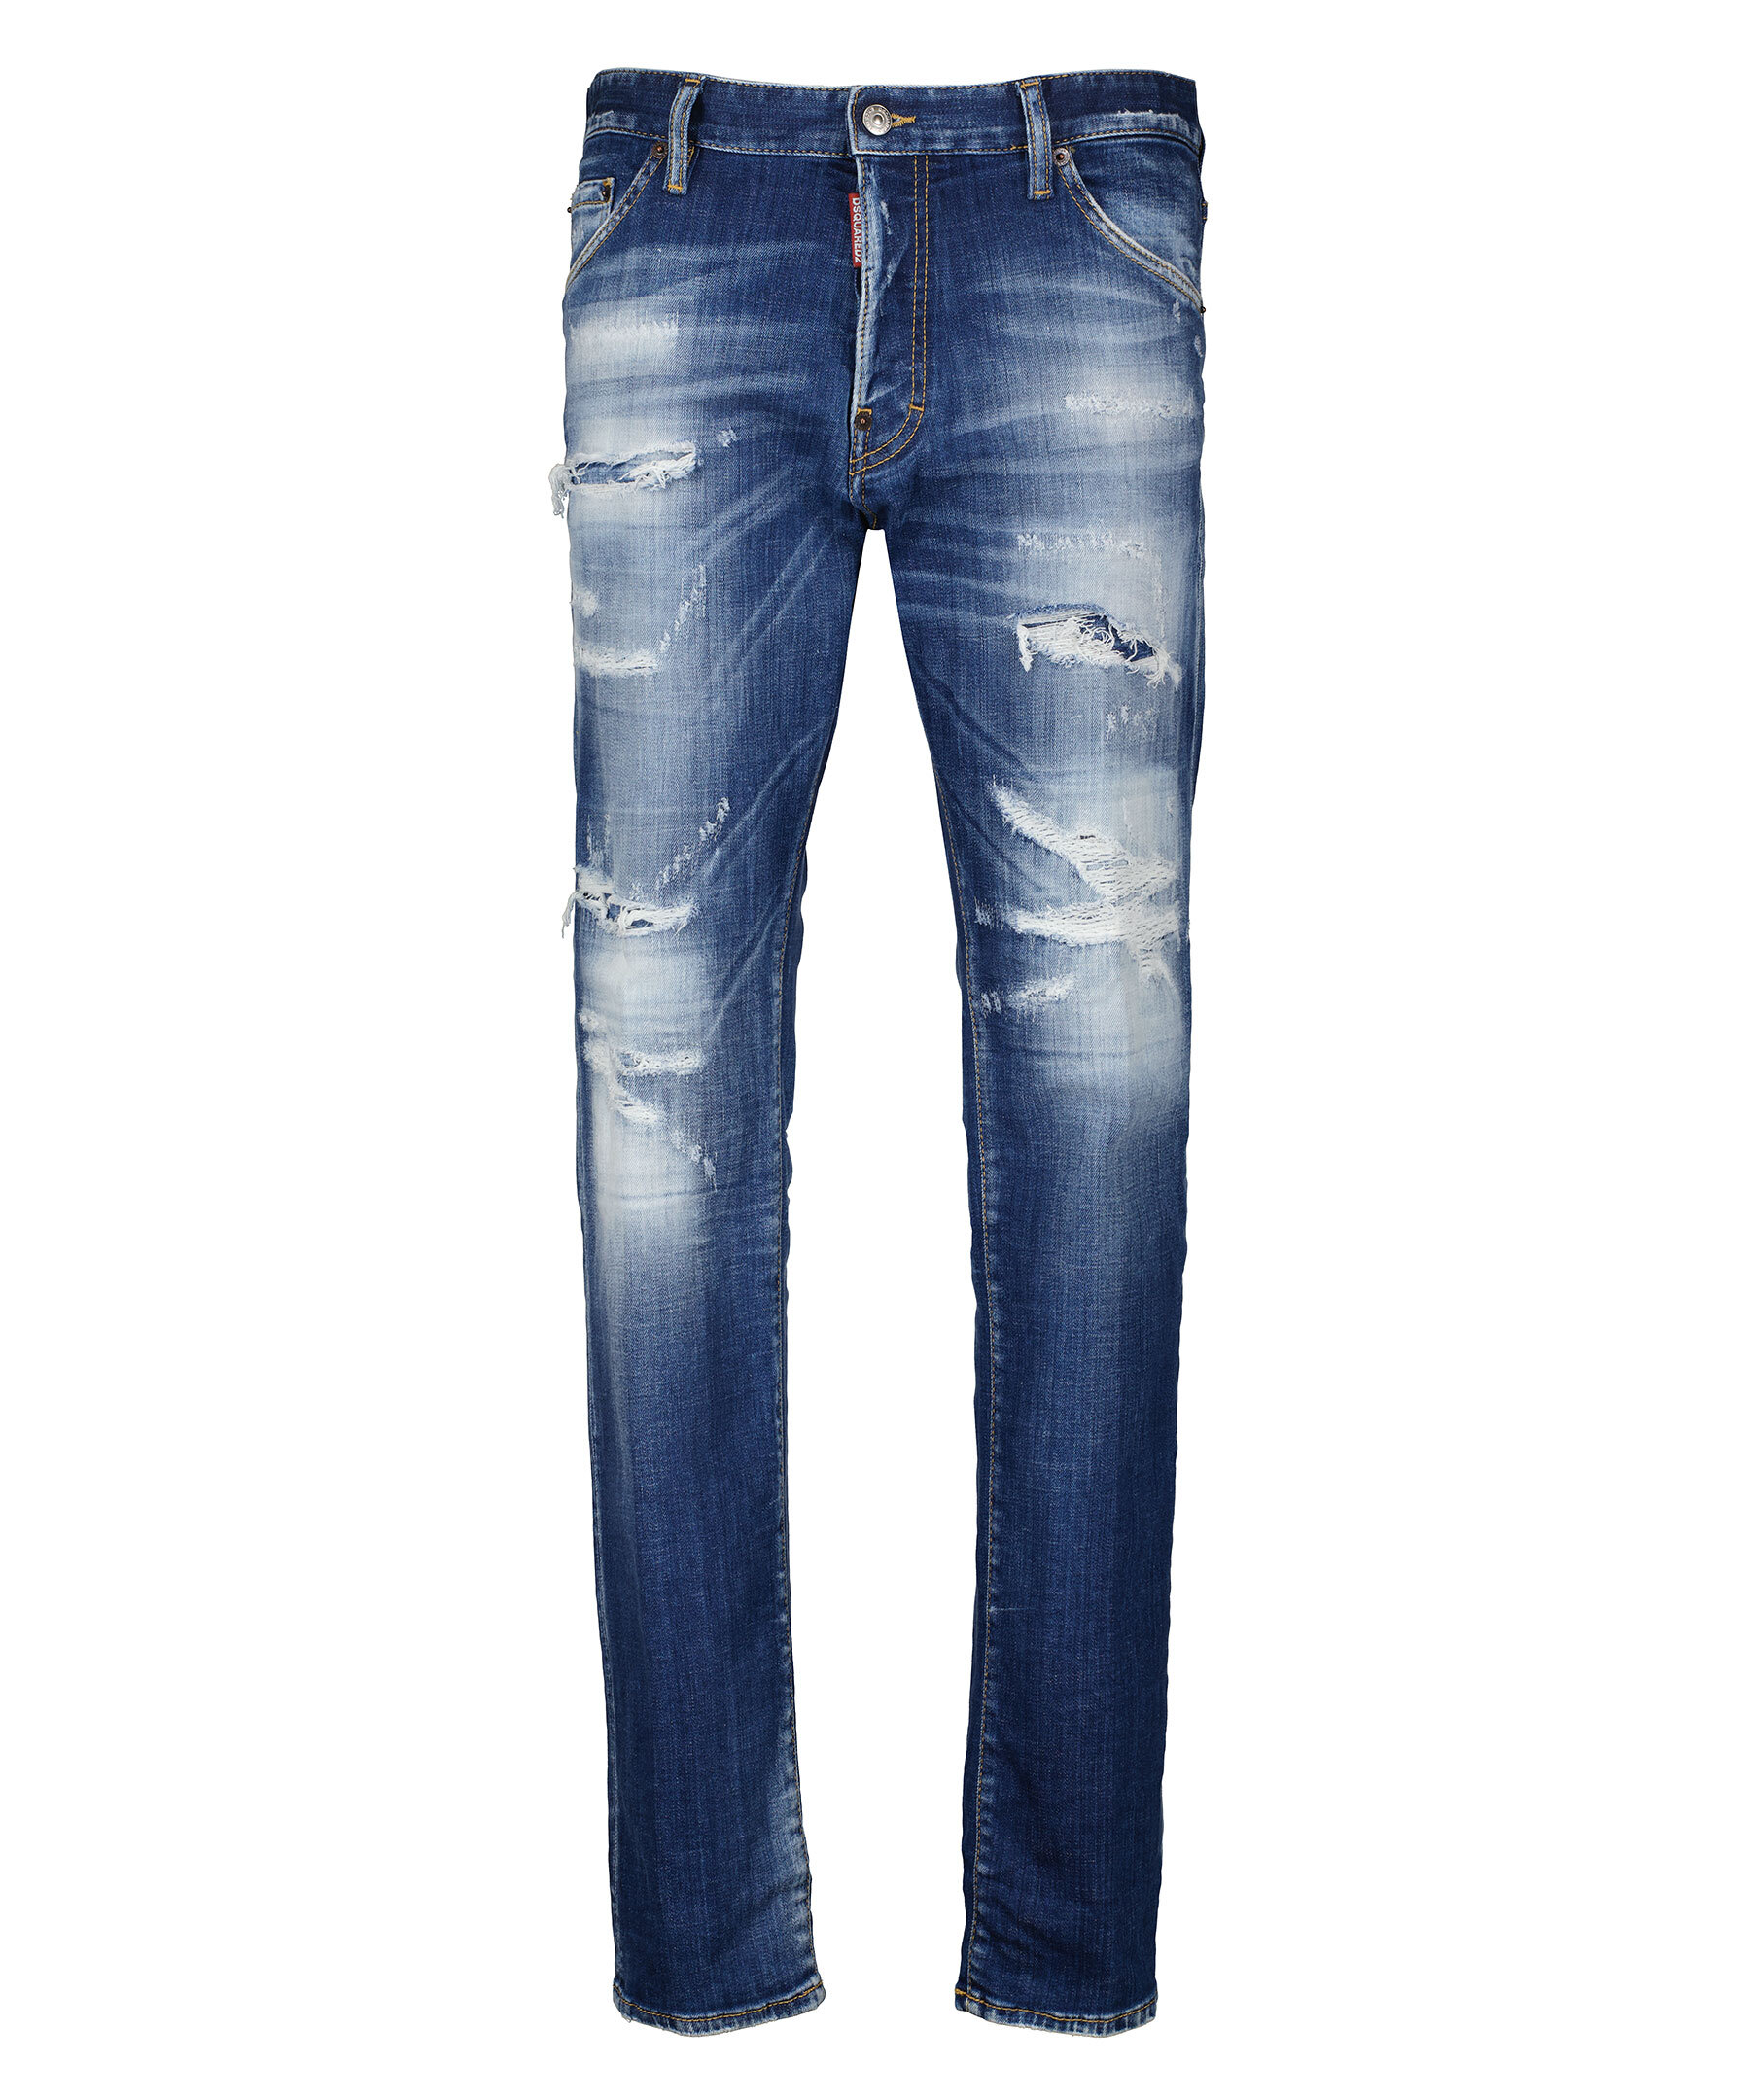 DSQUARED2: jeans with multi patches - Denim  Dsquared2 jeans S74LB0811  S30664 online at